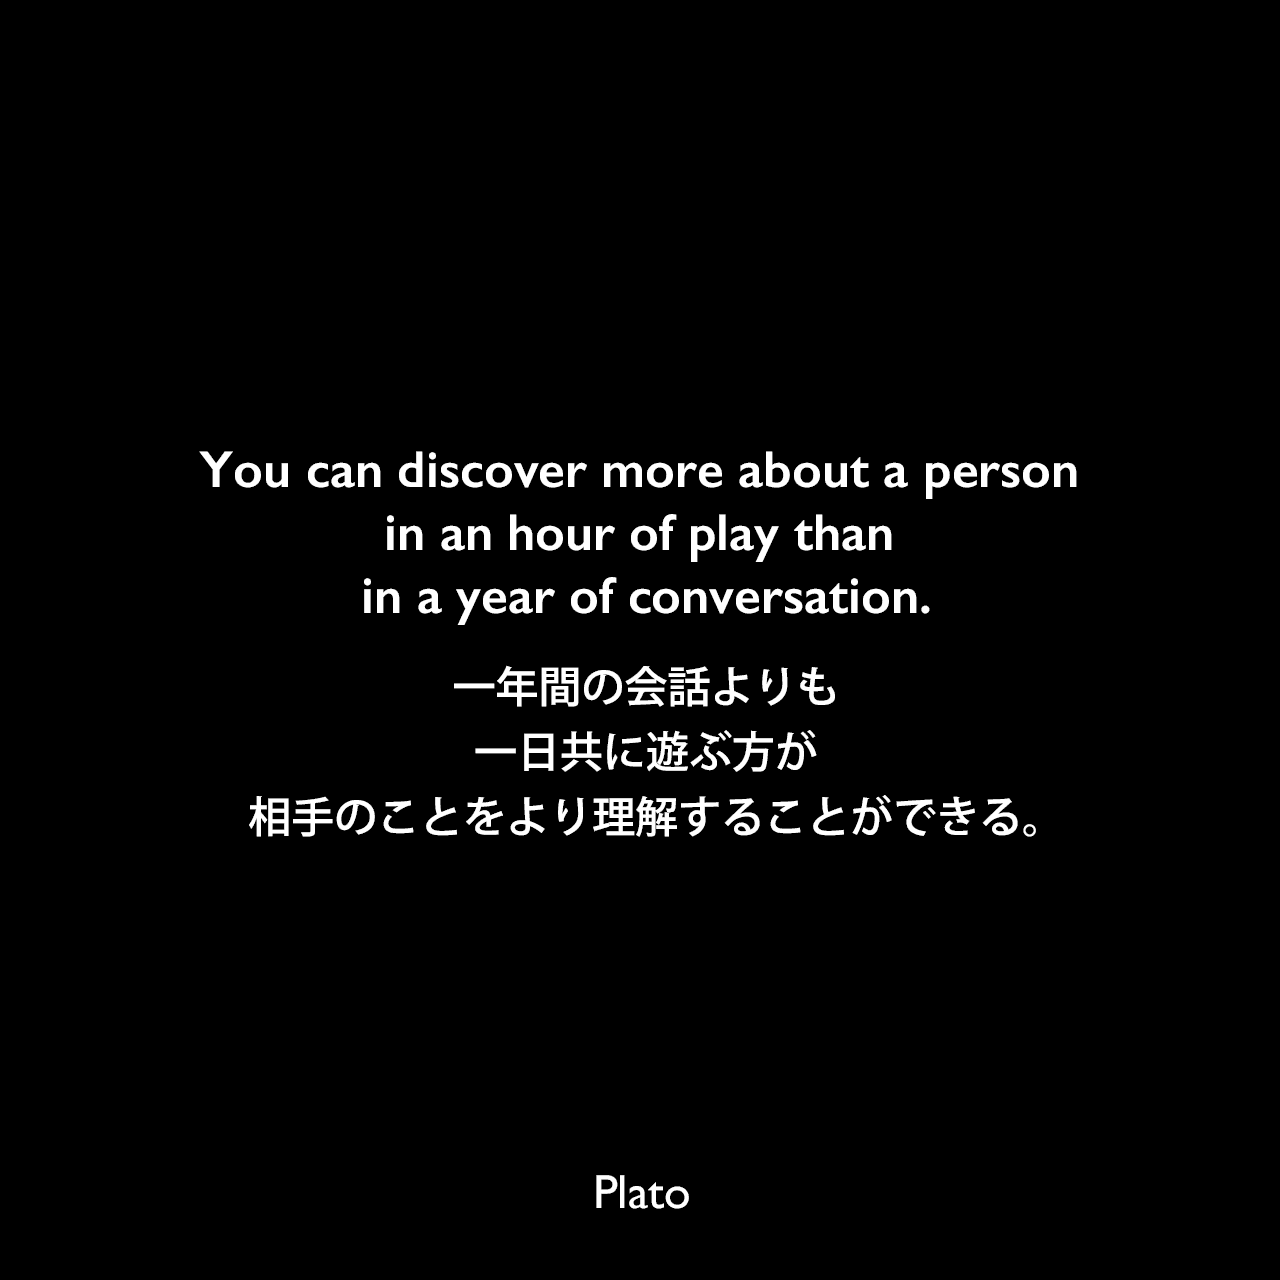 You can discover more about a person in an hour of play than in a year of conversation.一年間の会話よりも、一日共に遊ぶ方が相手のことをより理解することができる。